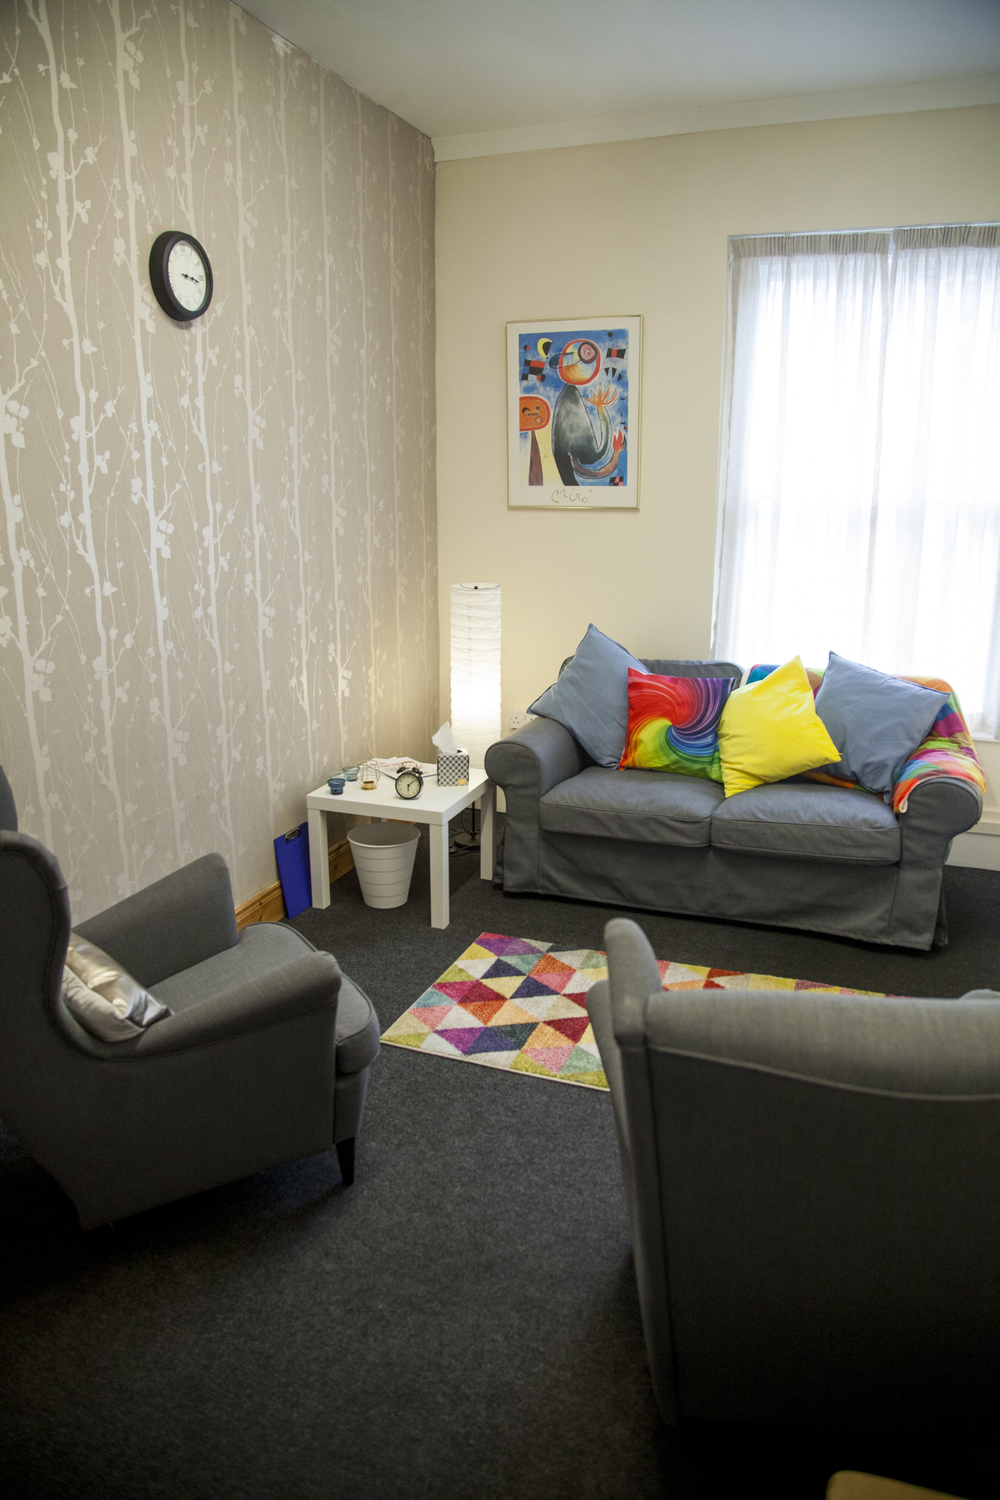 Gallery Photo of Therapy room on Capel Street.  Large enough for covid distancing.